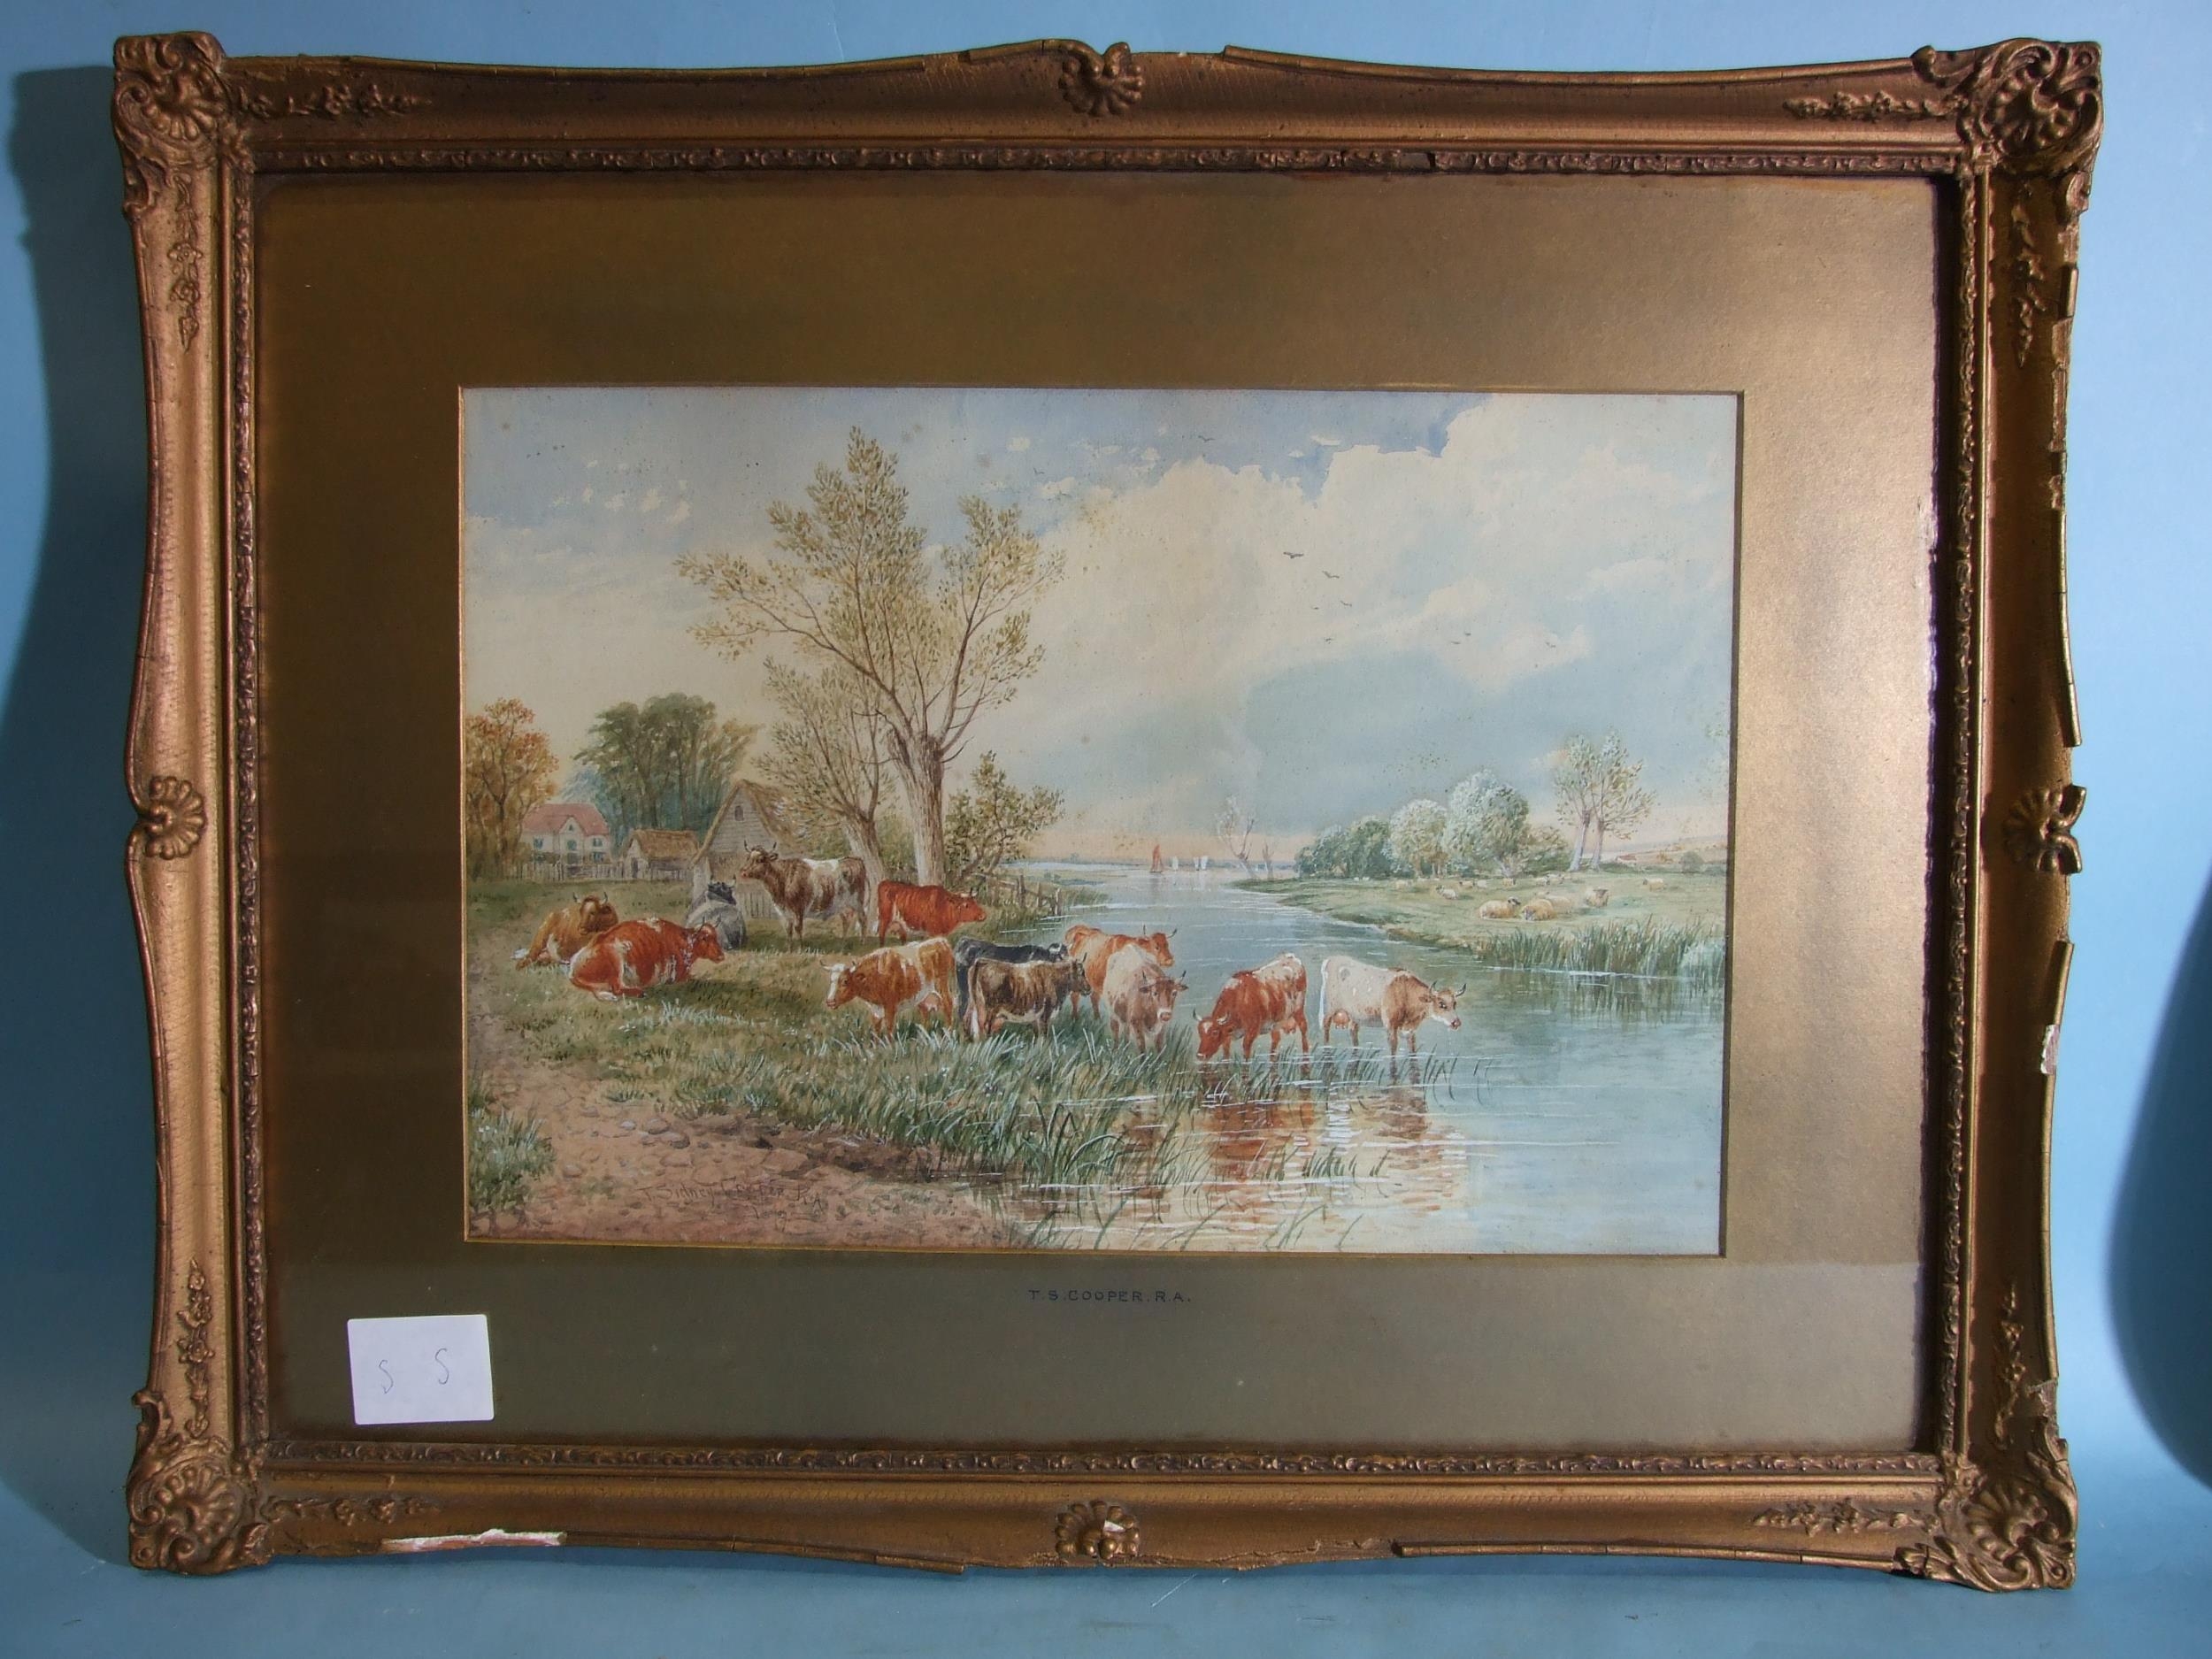 Follower of Thomas Sydney Cooper CATTLE DRINKING FROM A RIVER WITH COTTAGES BEYOND Watercolour,